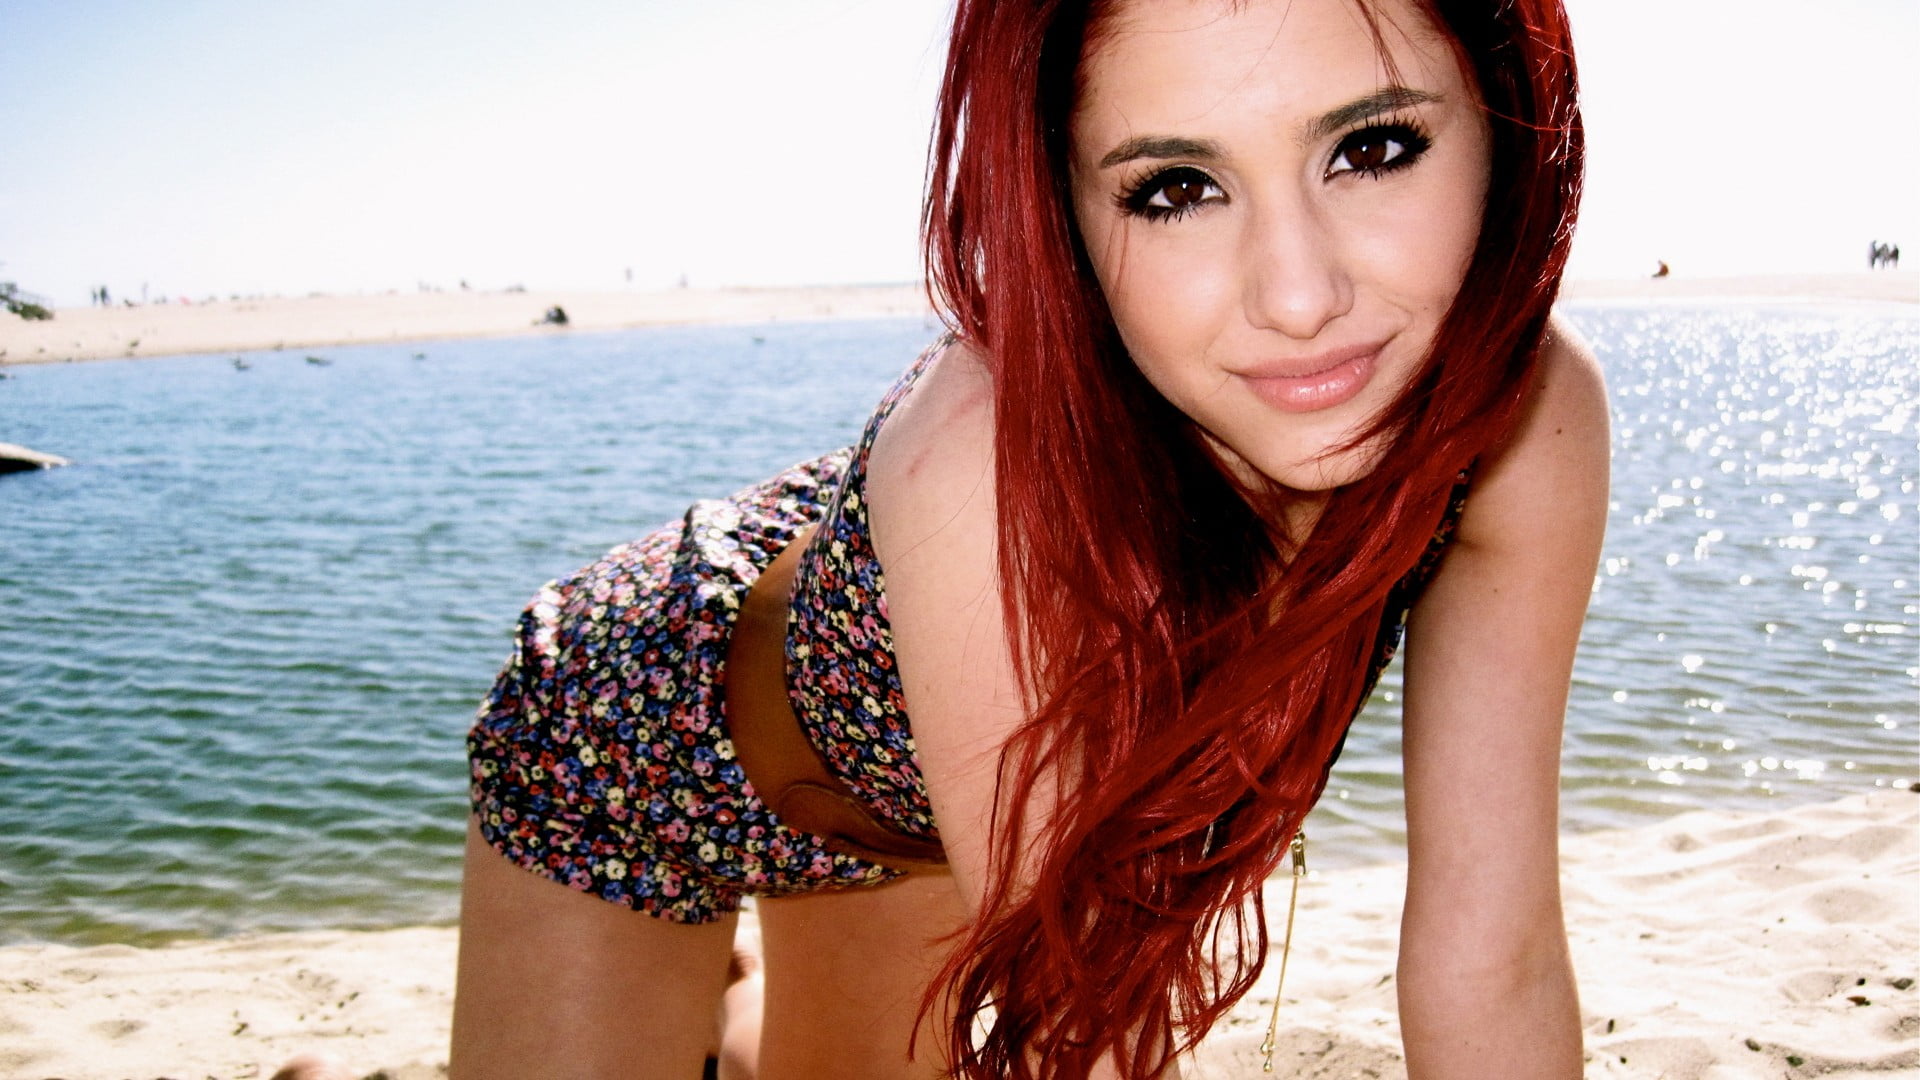 women's multicolored crop top and bottoms, redhead, Ariana Grande